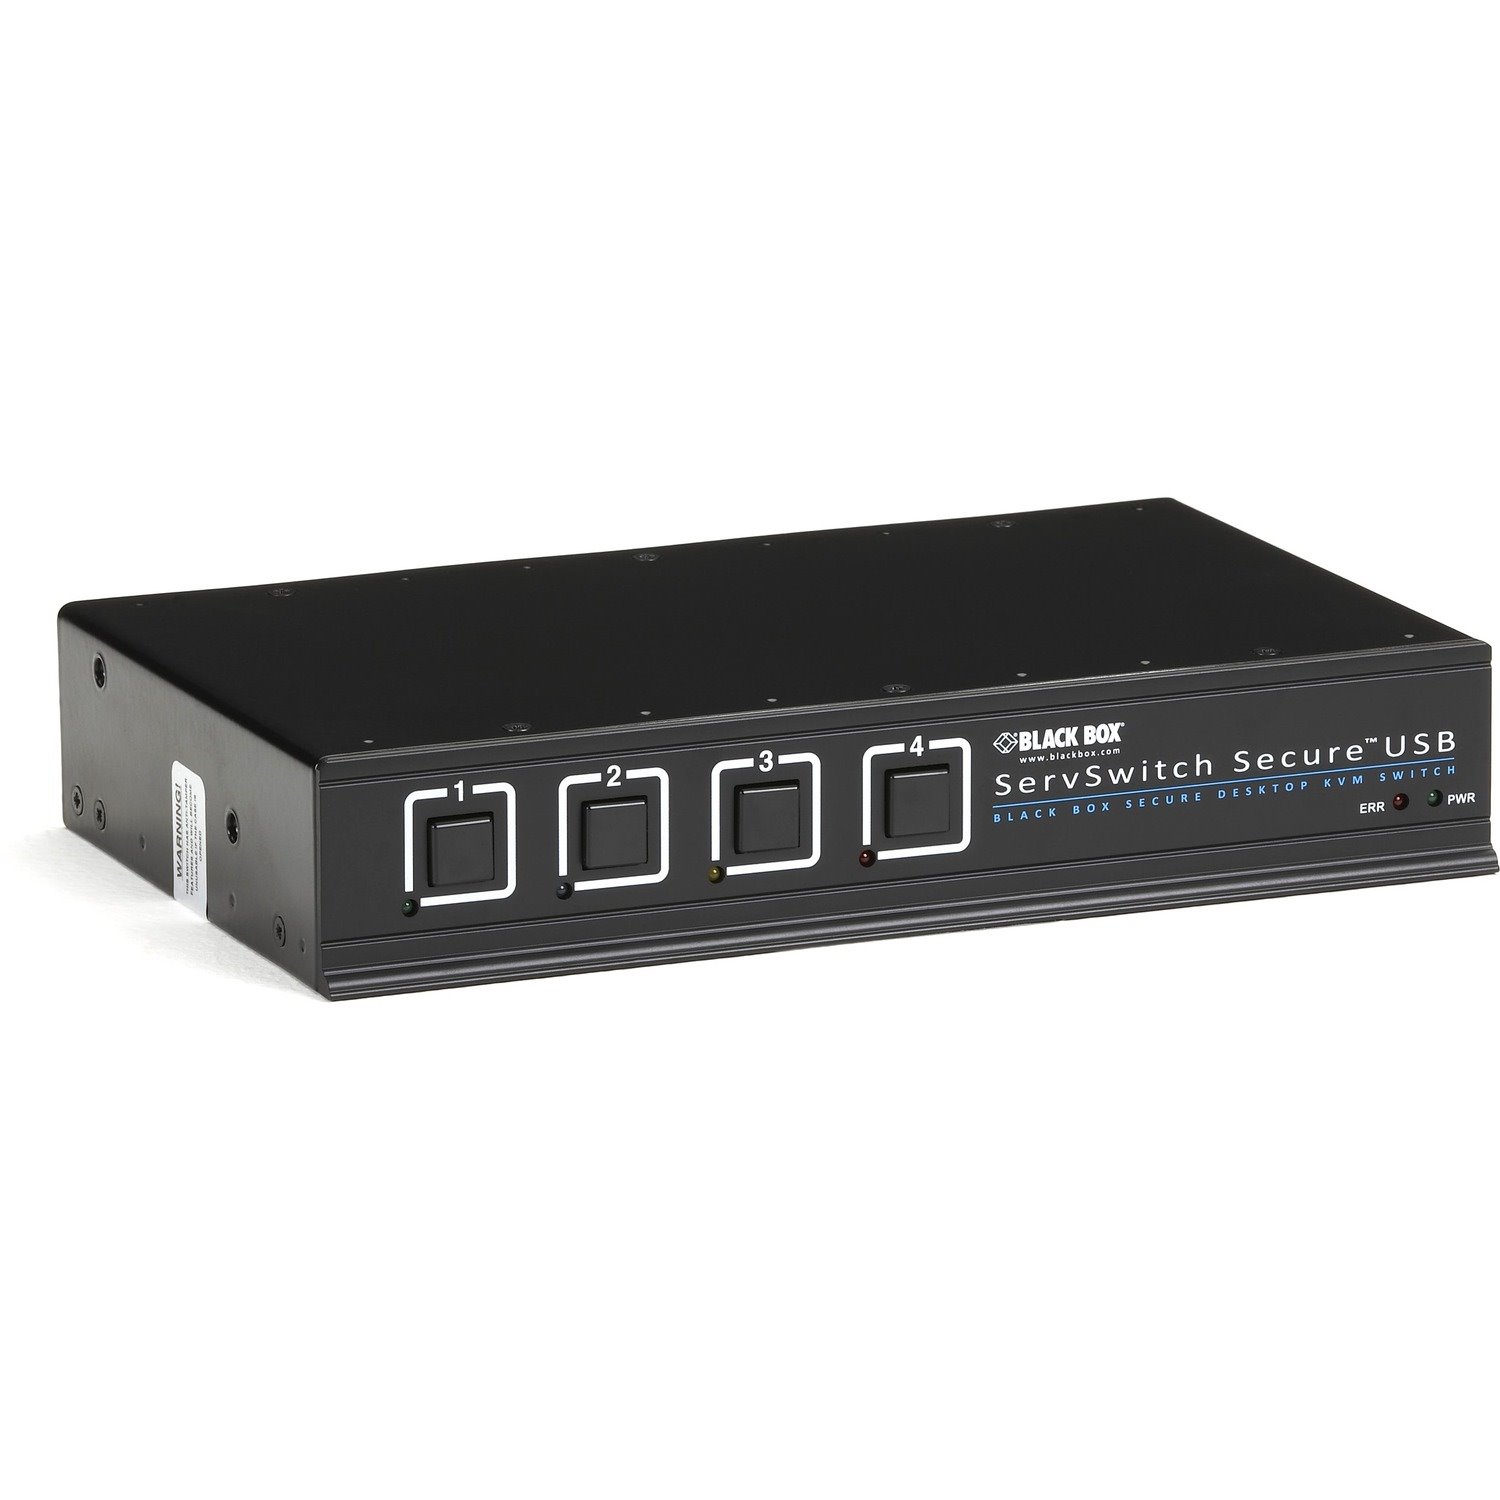 Black Box ServSwitch Secure KVM Switch with USB, EAL4+ Certified, DVI, 4-Port